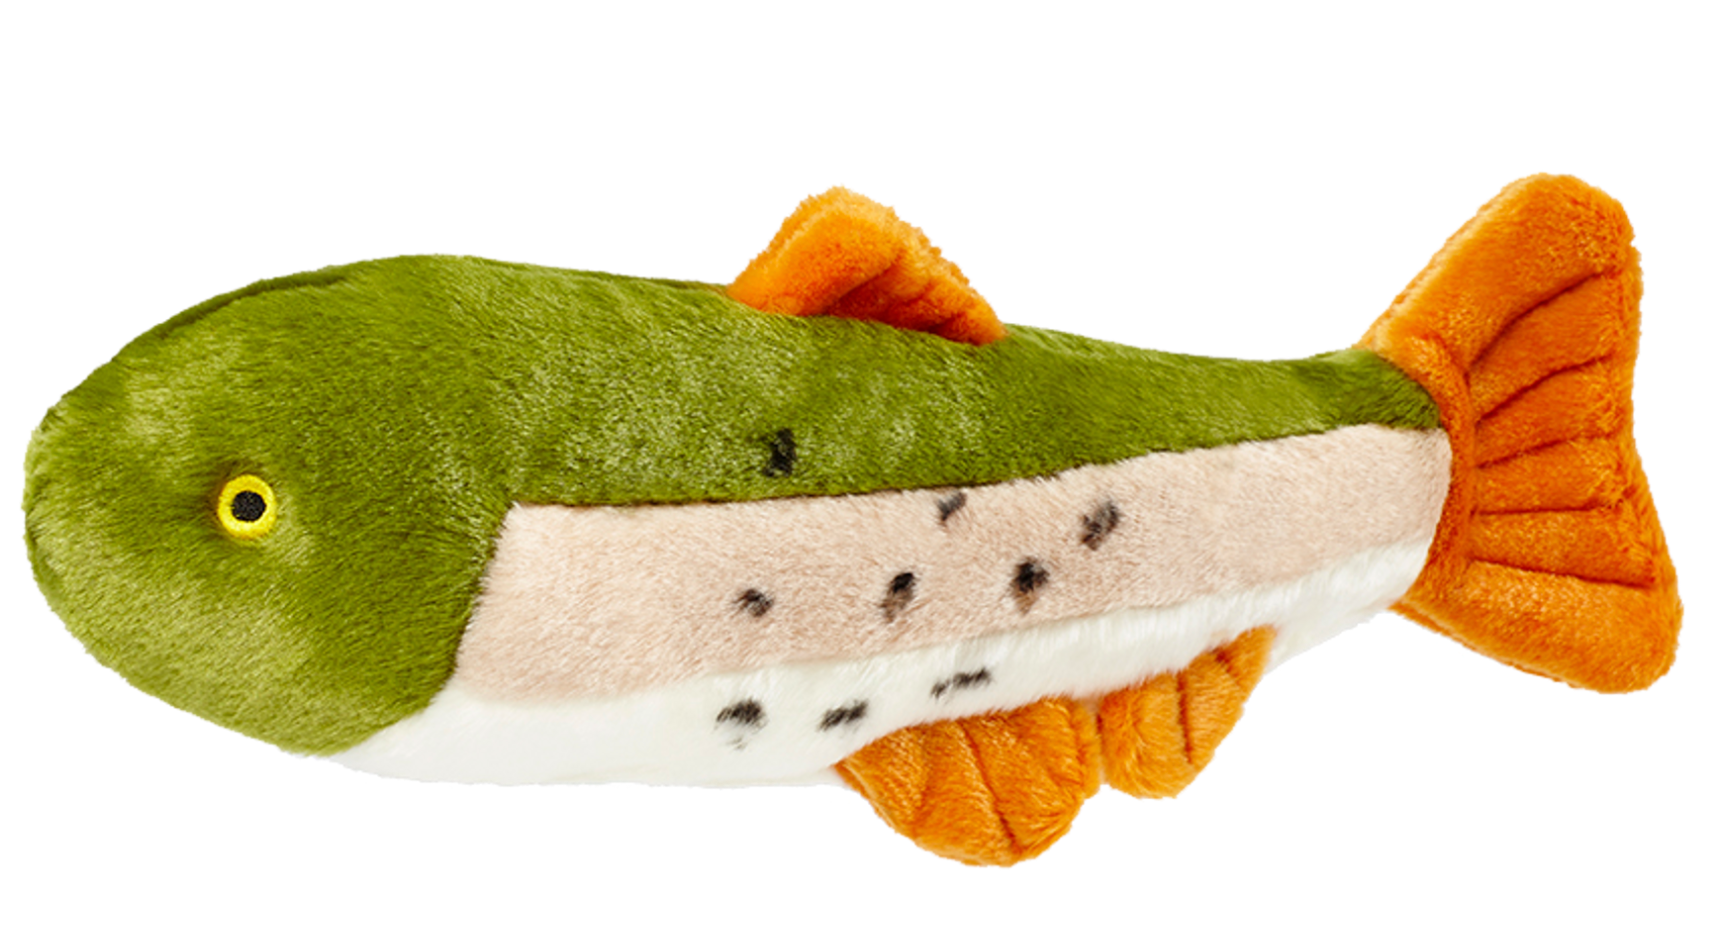 Fluff & Tuff  "Ruby Trout" Squeaky Plush Dog Toy, Large